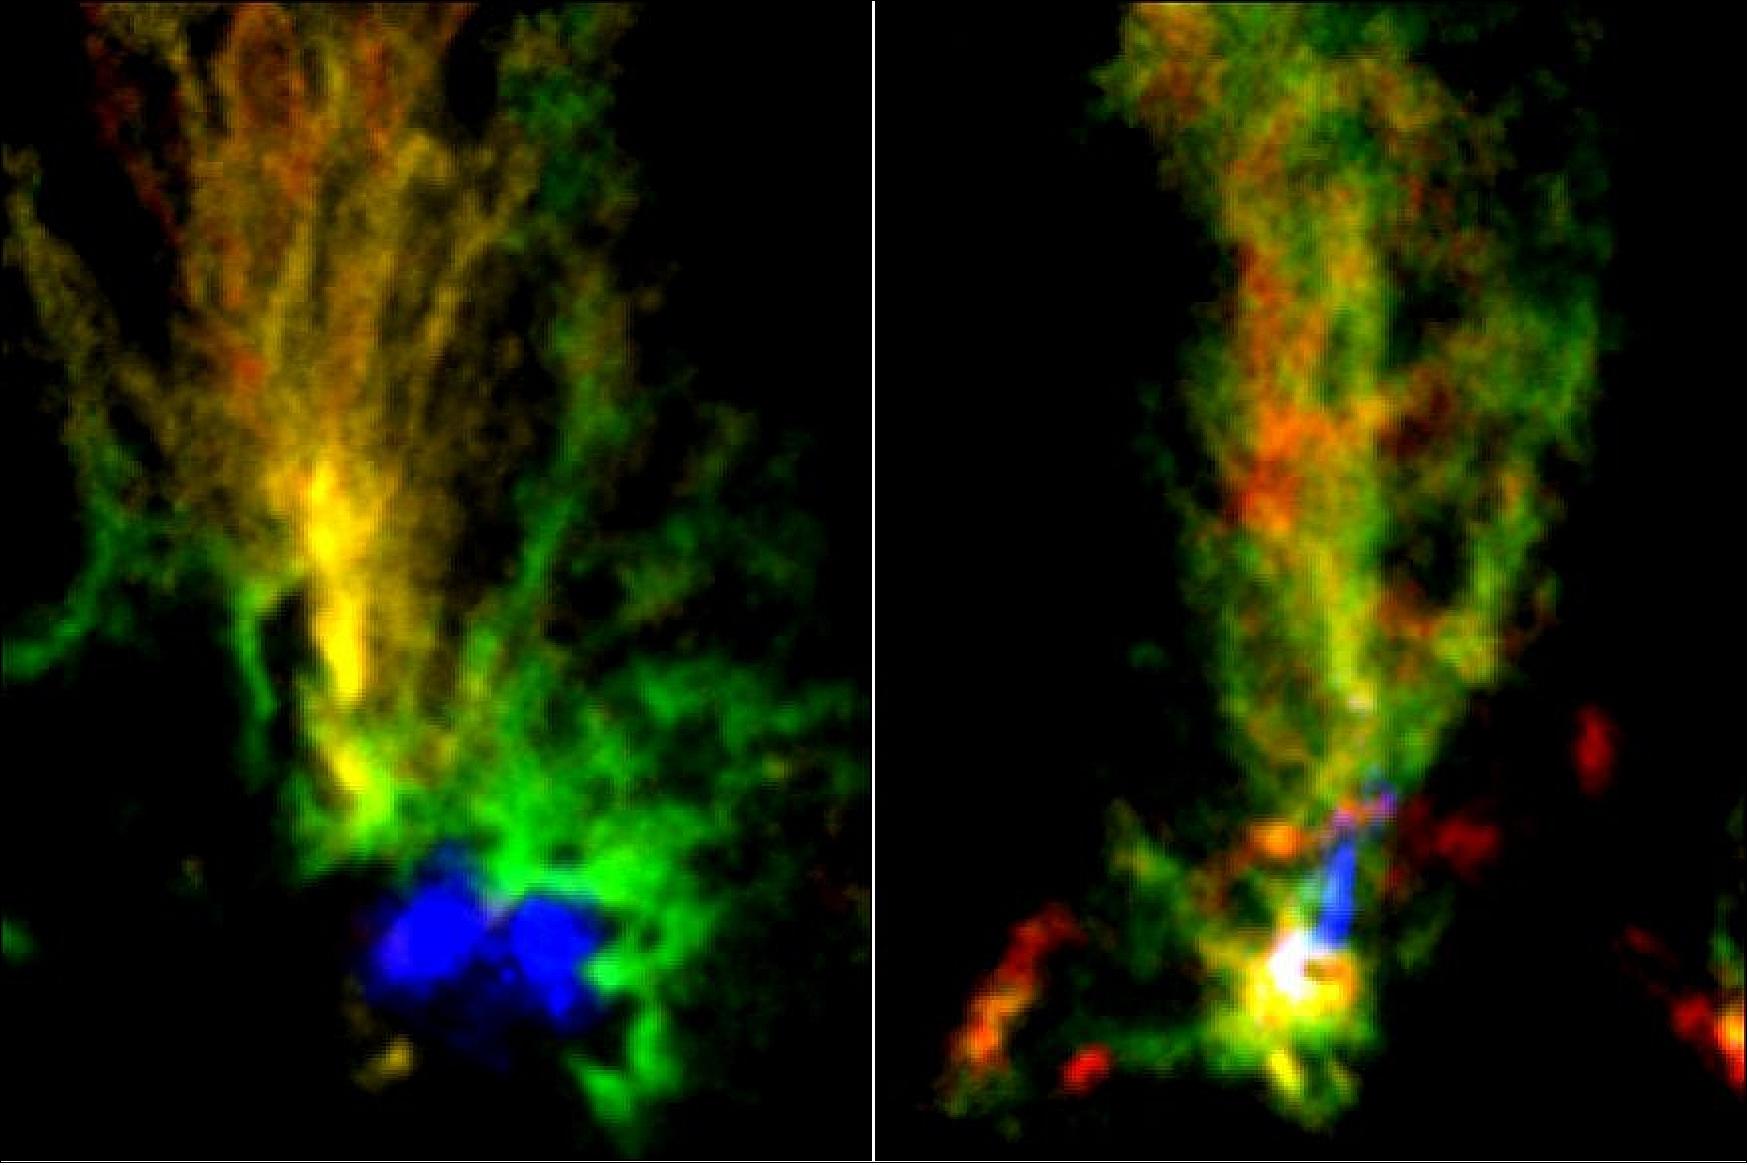 Figure 80: ALMA images of two molecular clouds N159E-Papillon Nebula (left) and N159W South (right). Red and green show the distribution of molecular gas in different velocities seen in the emission from 13CO. The blue region in N159E-Papillon Nebula shows the ionized hydrogen gas observed with the Hubble Space Telescope. The blue part in N159W South shows the emission from dust particles obtained with ALMA [image credit: ALMA (ESO/NAOJ/NRAO)/Fukui et al./Tokuda et al./NASA-ESA Hubble Space Telescope]